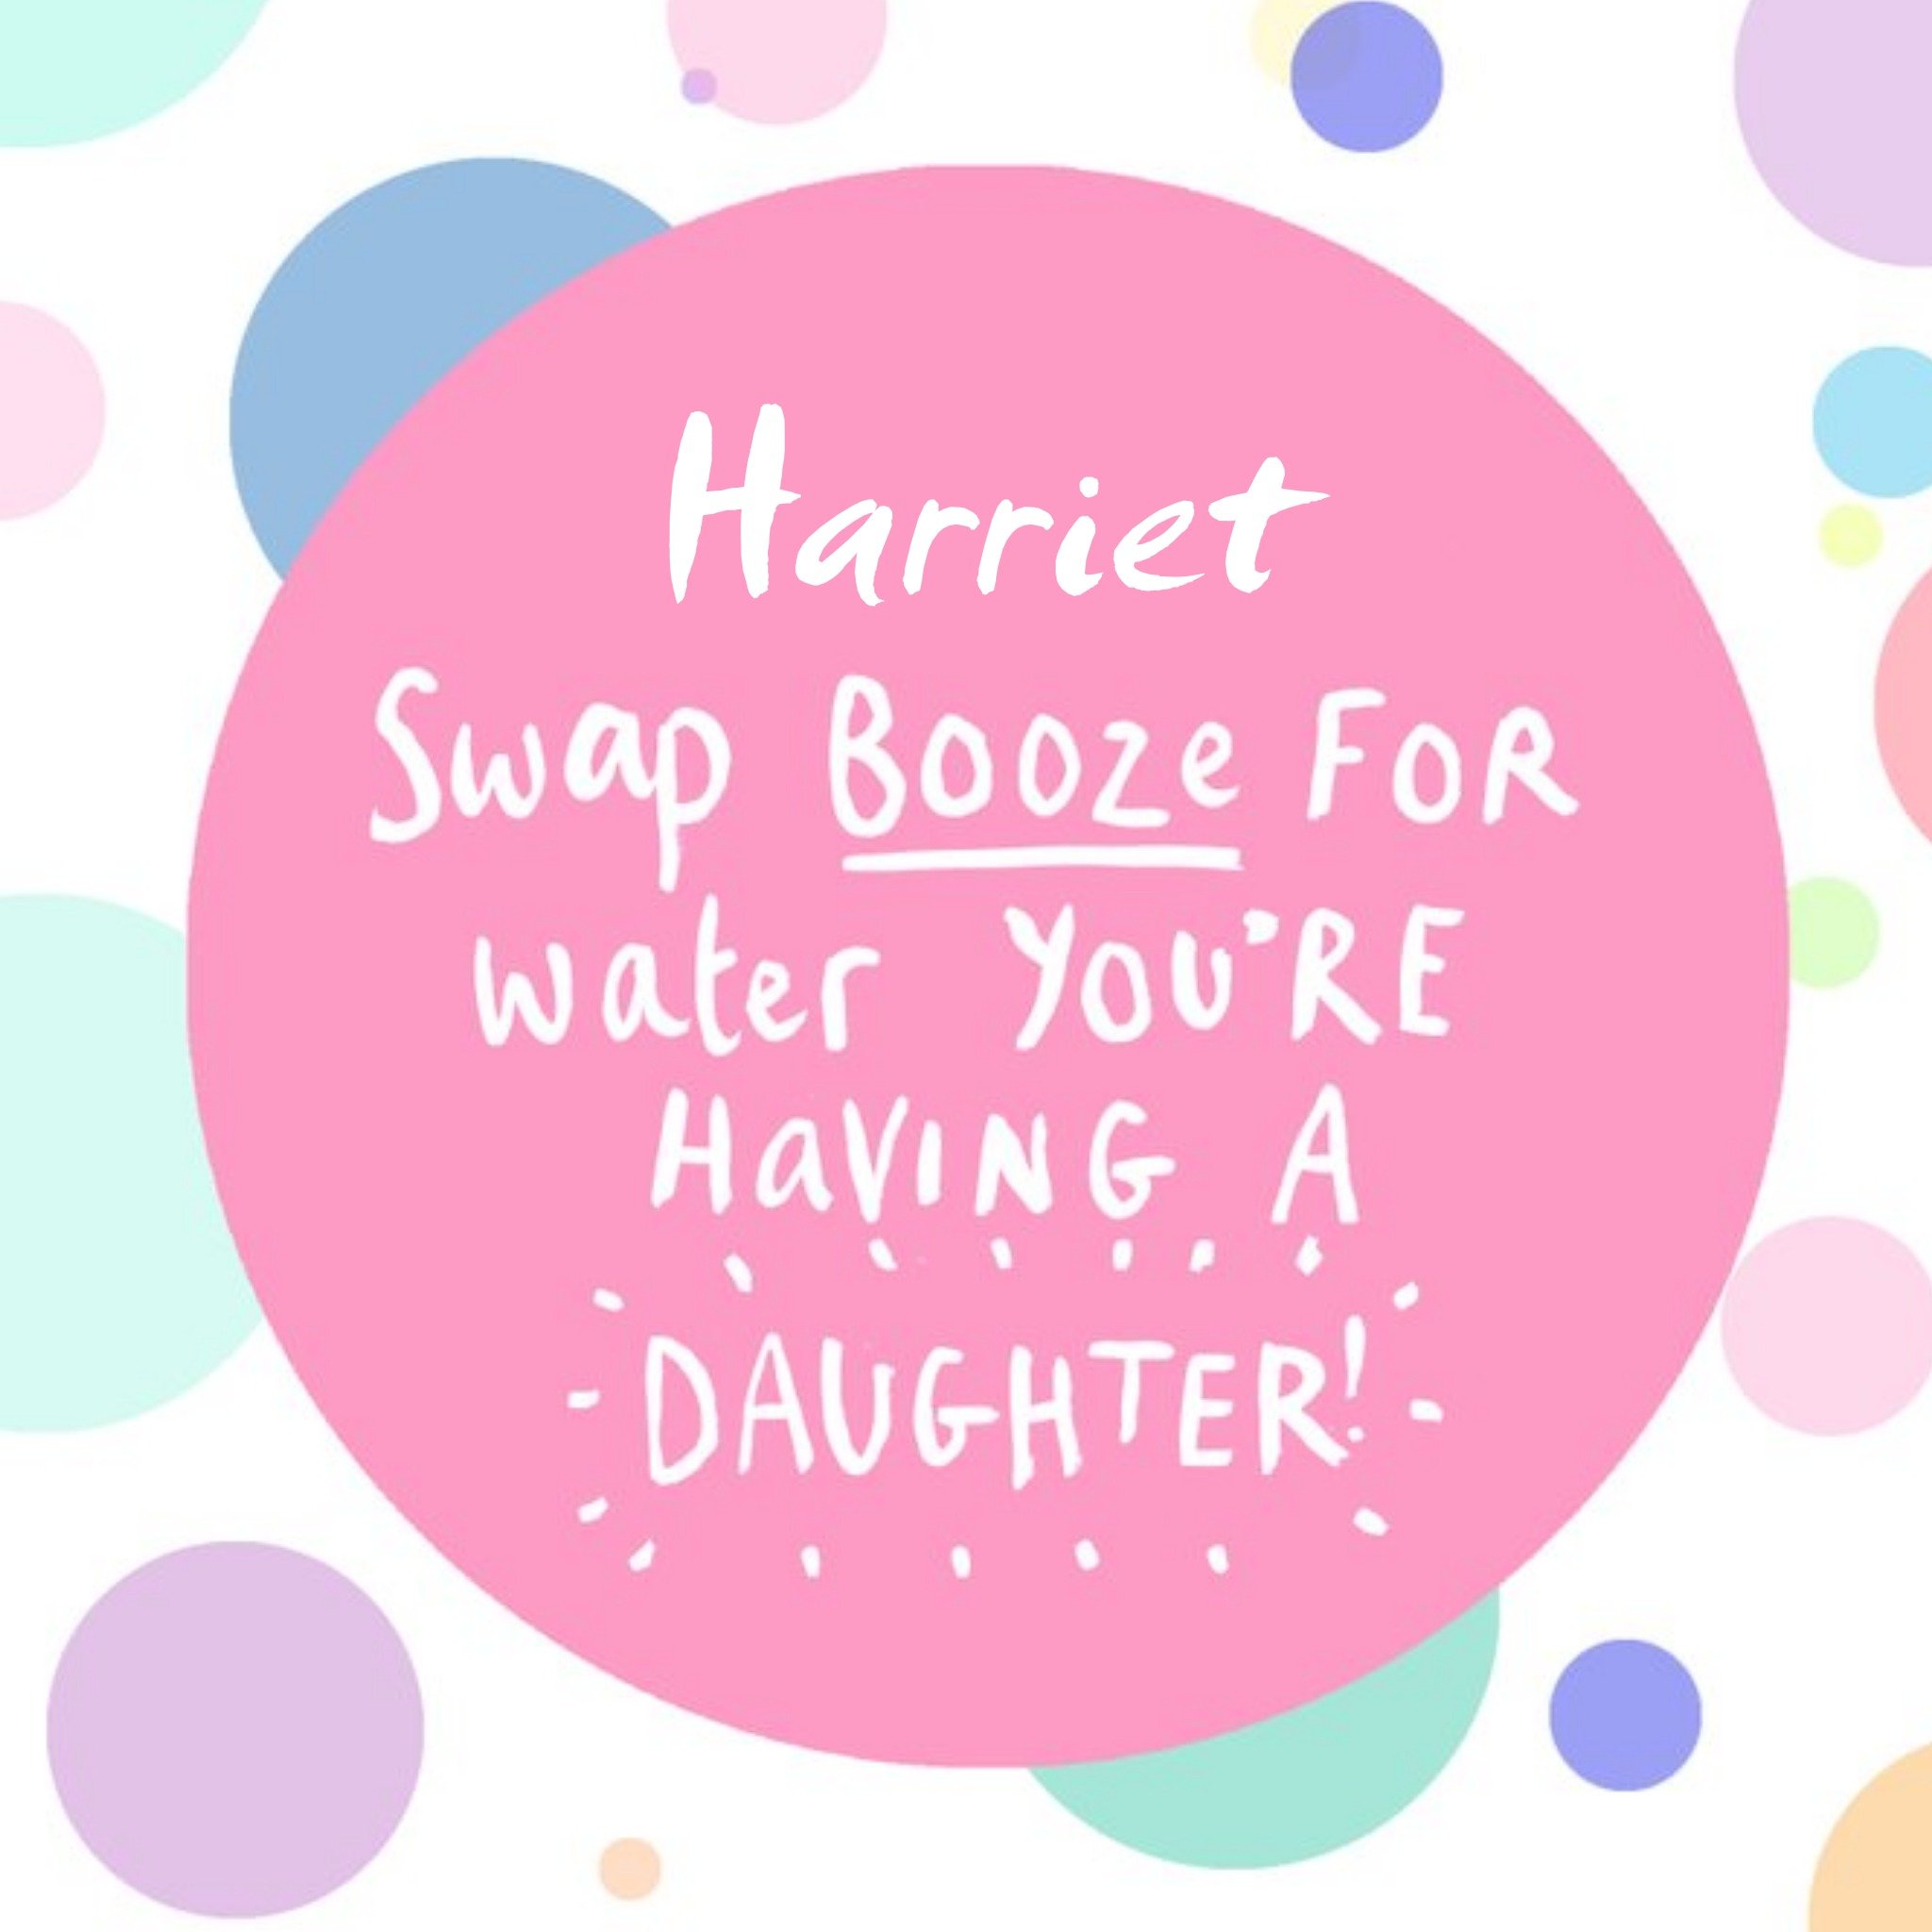 Moonpig Swap Booze For Water You're Having A Daughter Personalised Congratulations Card, Large